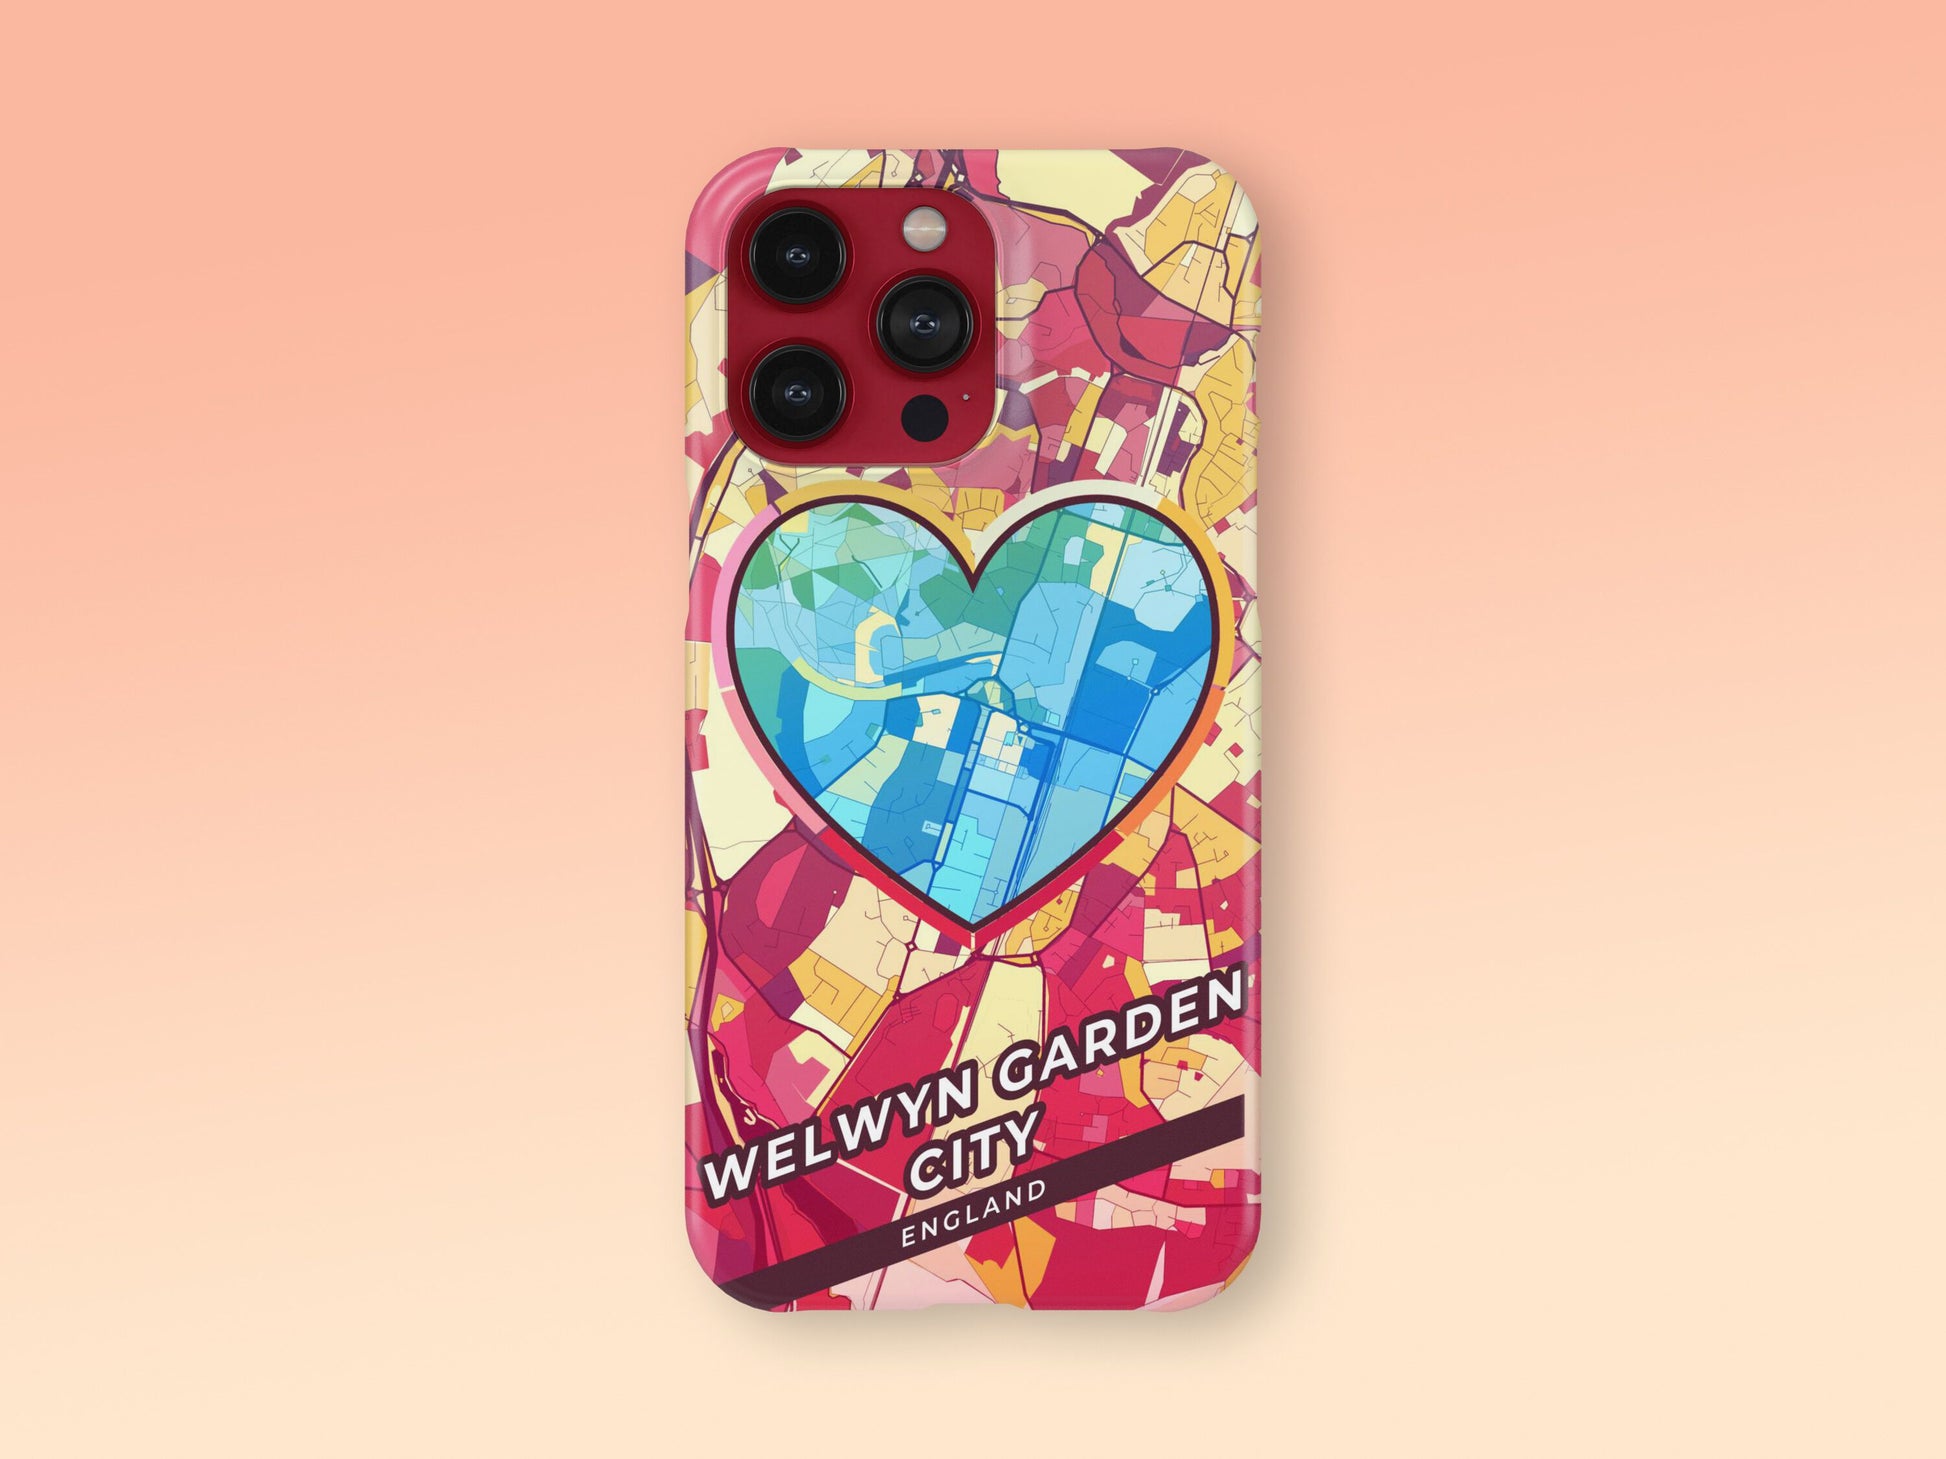 Welwyn Garden City England slim phone case with colorful icon 2